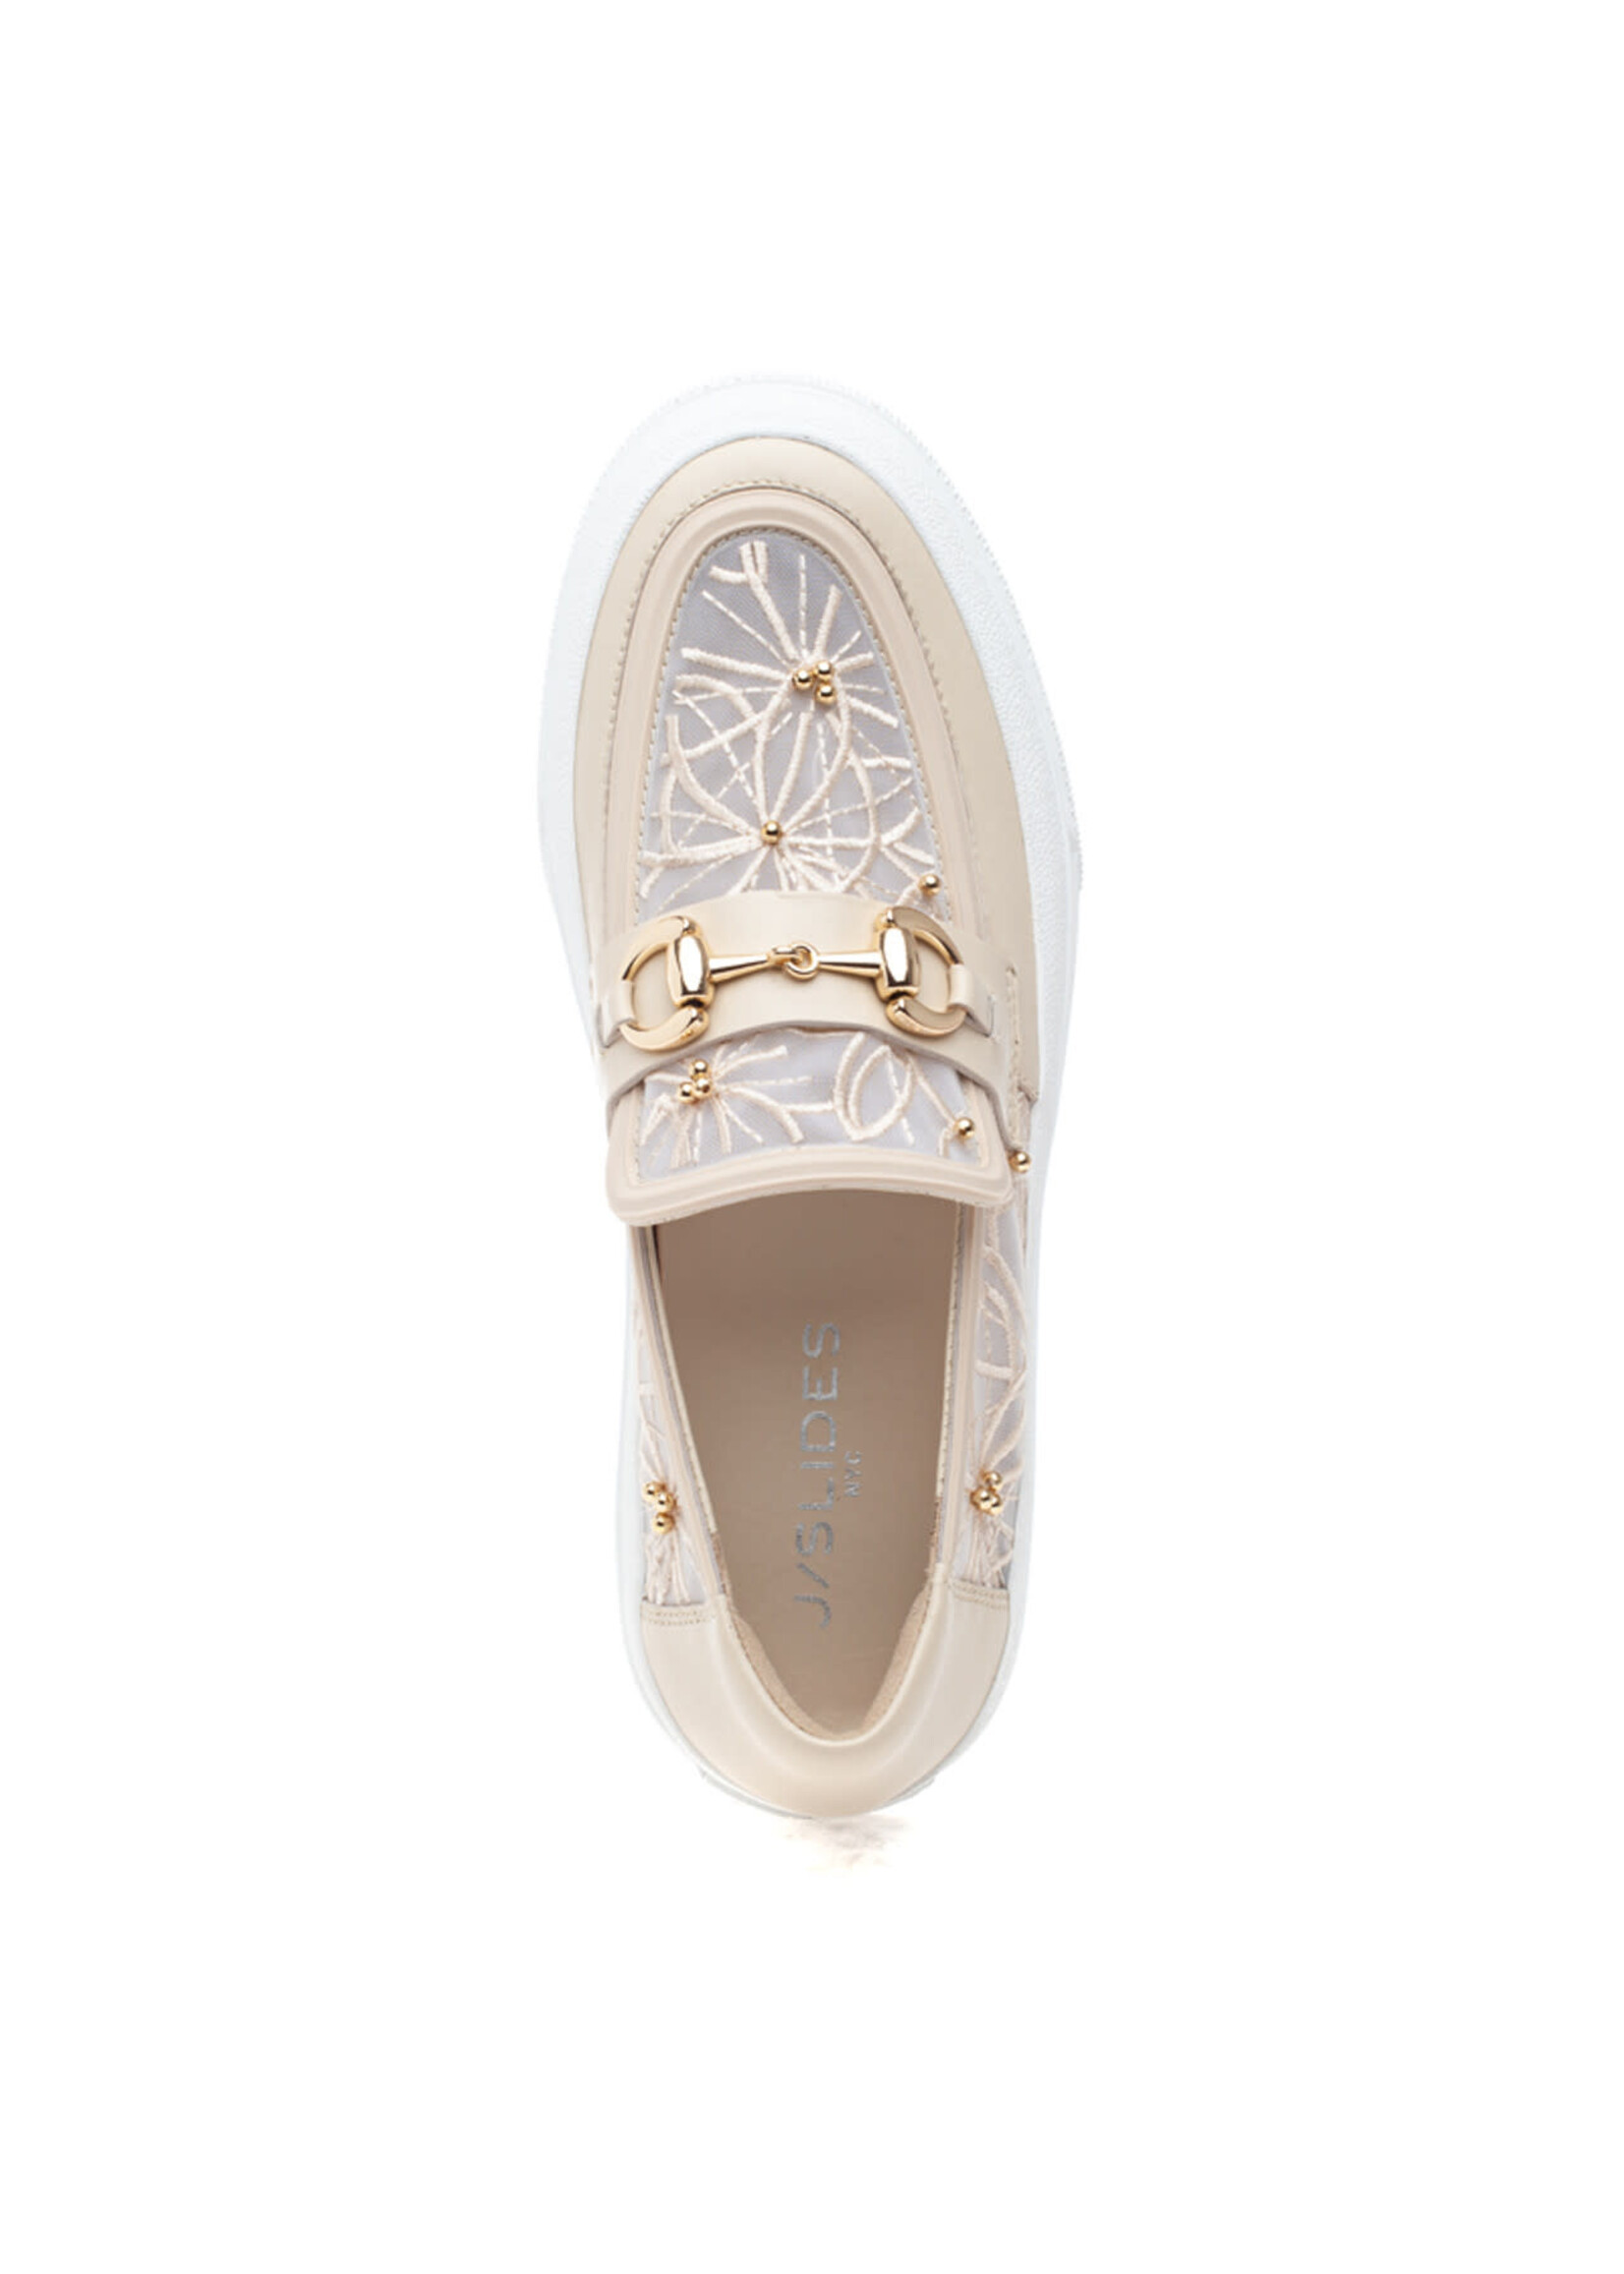 JSlides NYC Georgy Beige Lace and Leather by JSlides NYC   $99.99 Blowout